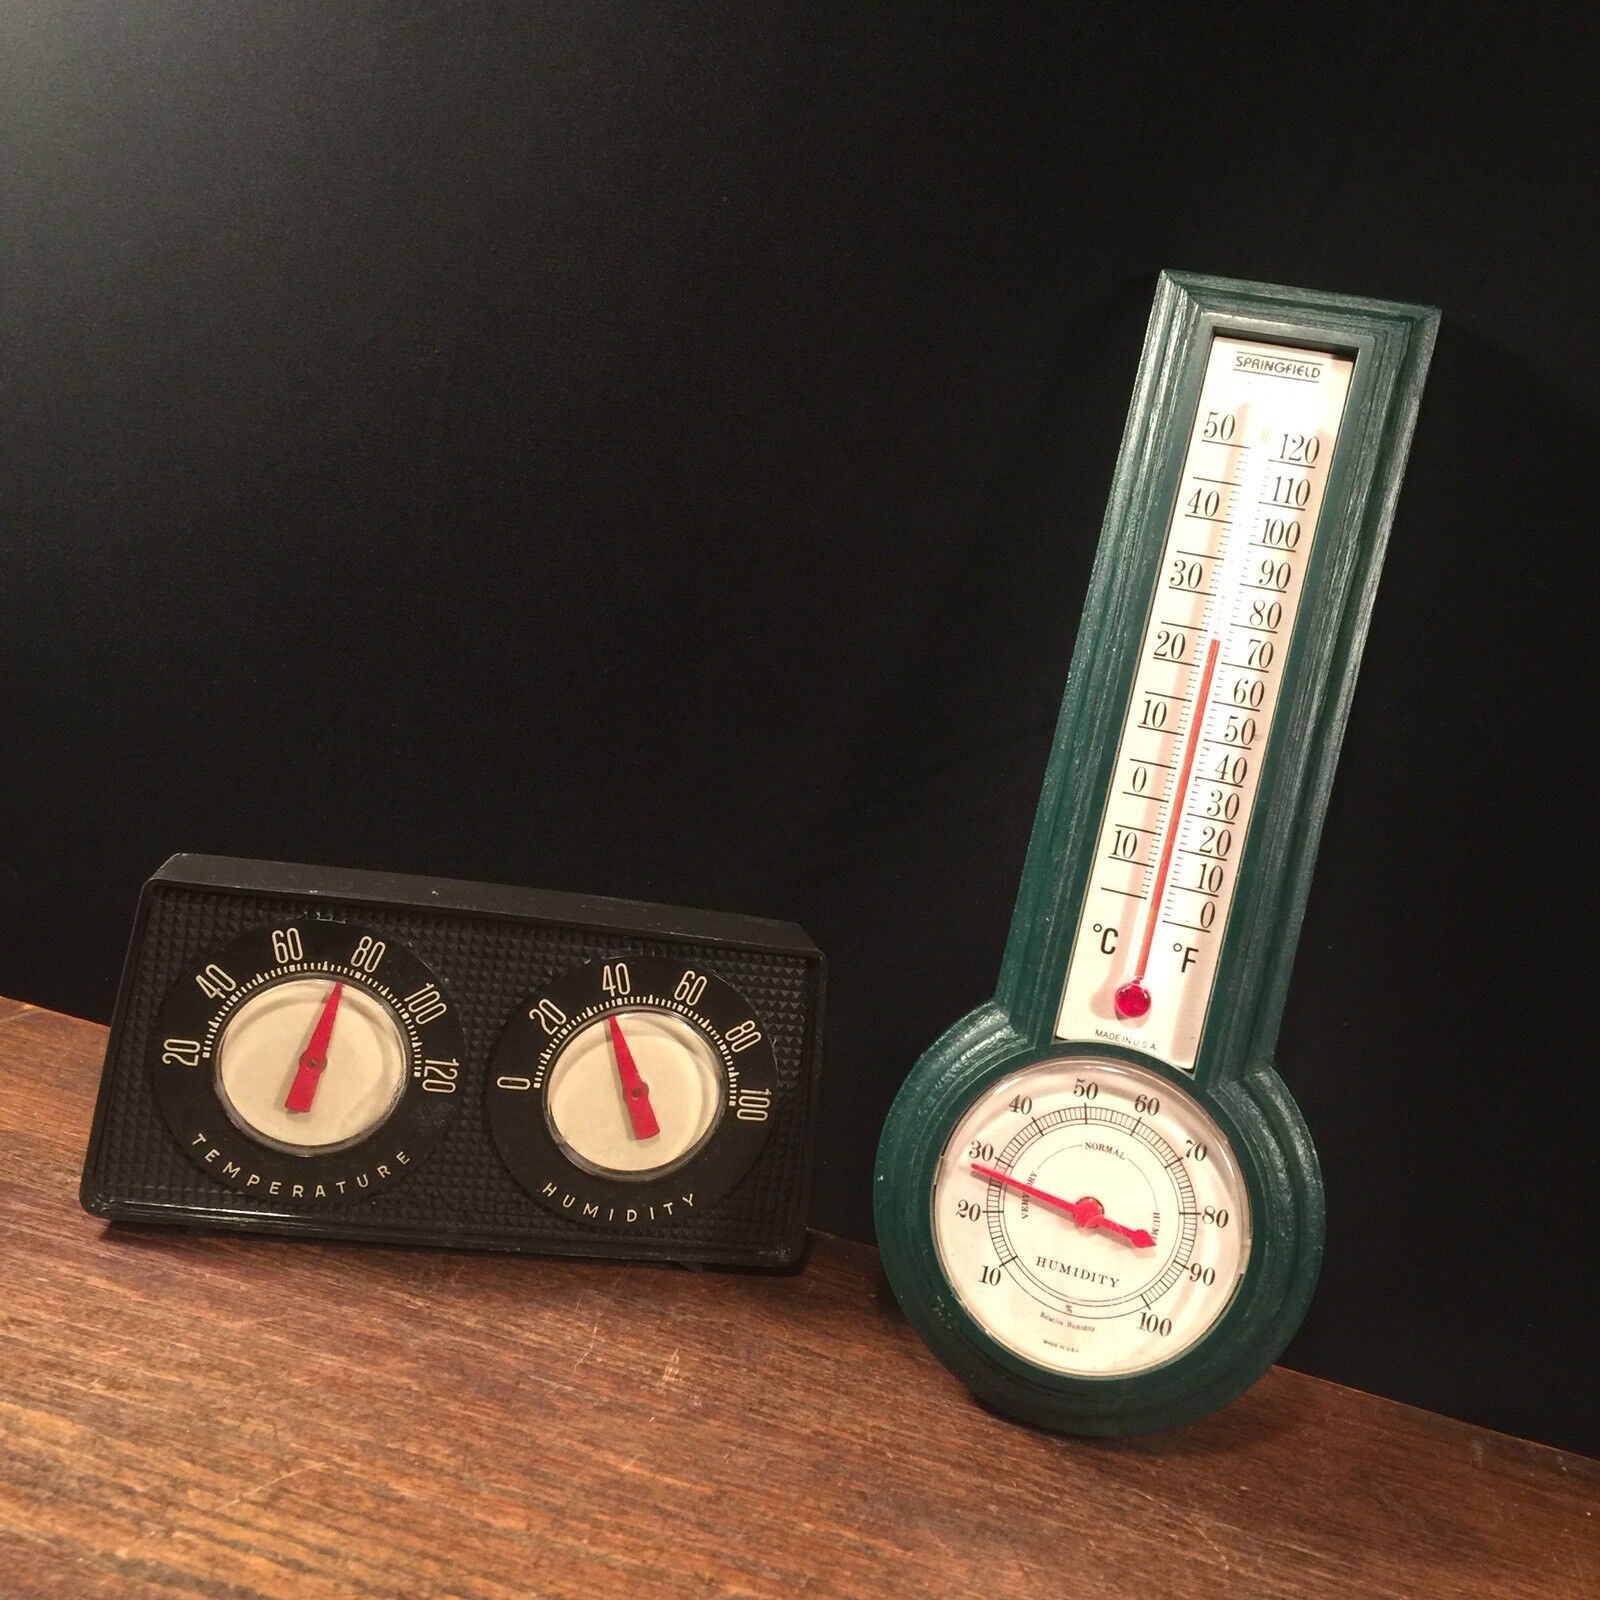 Vtg Thermometer Barometer Lot Challenge the lowest price 2 Humidity Temperature Plast Ranking TOP2 USA